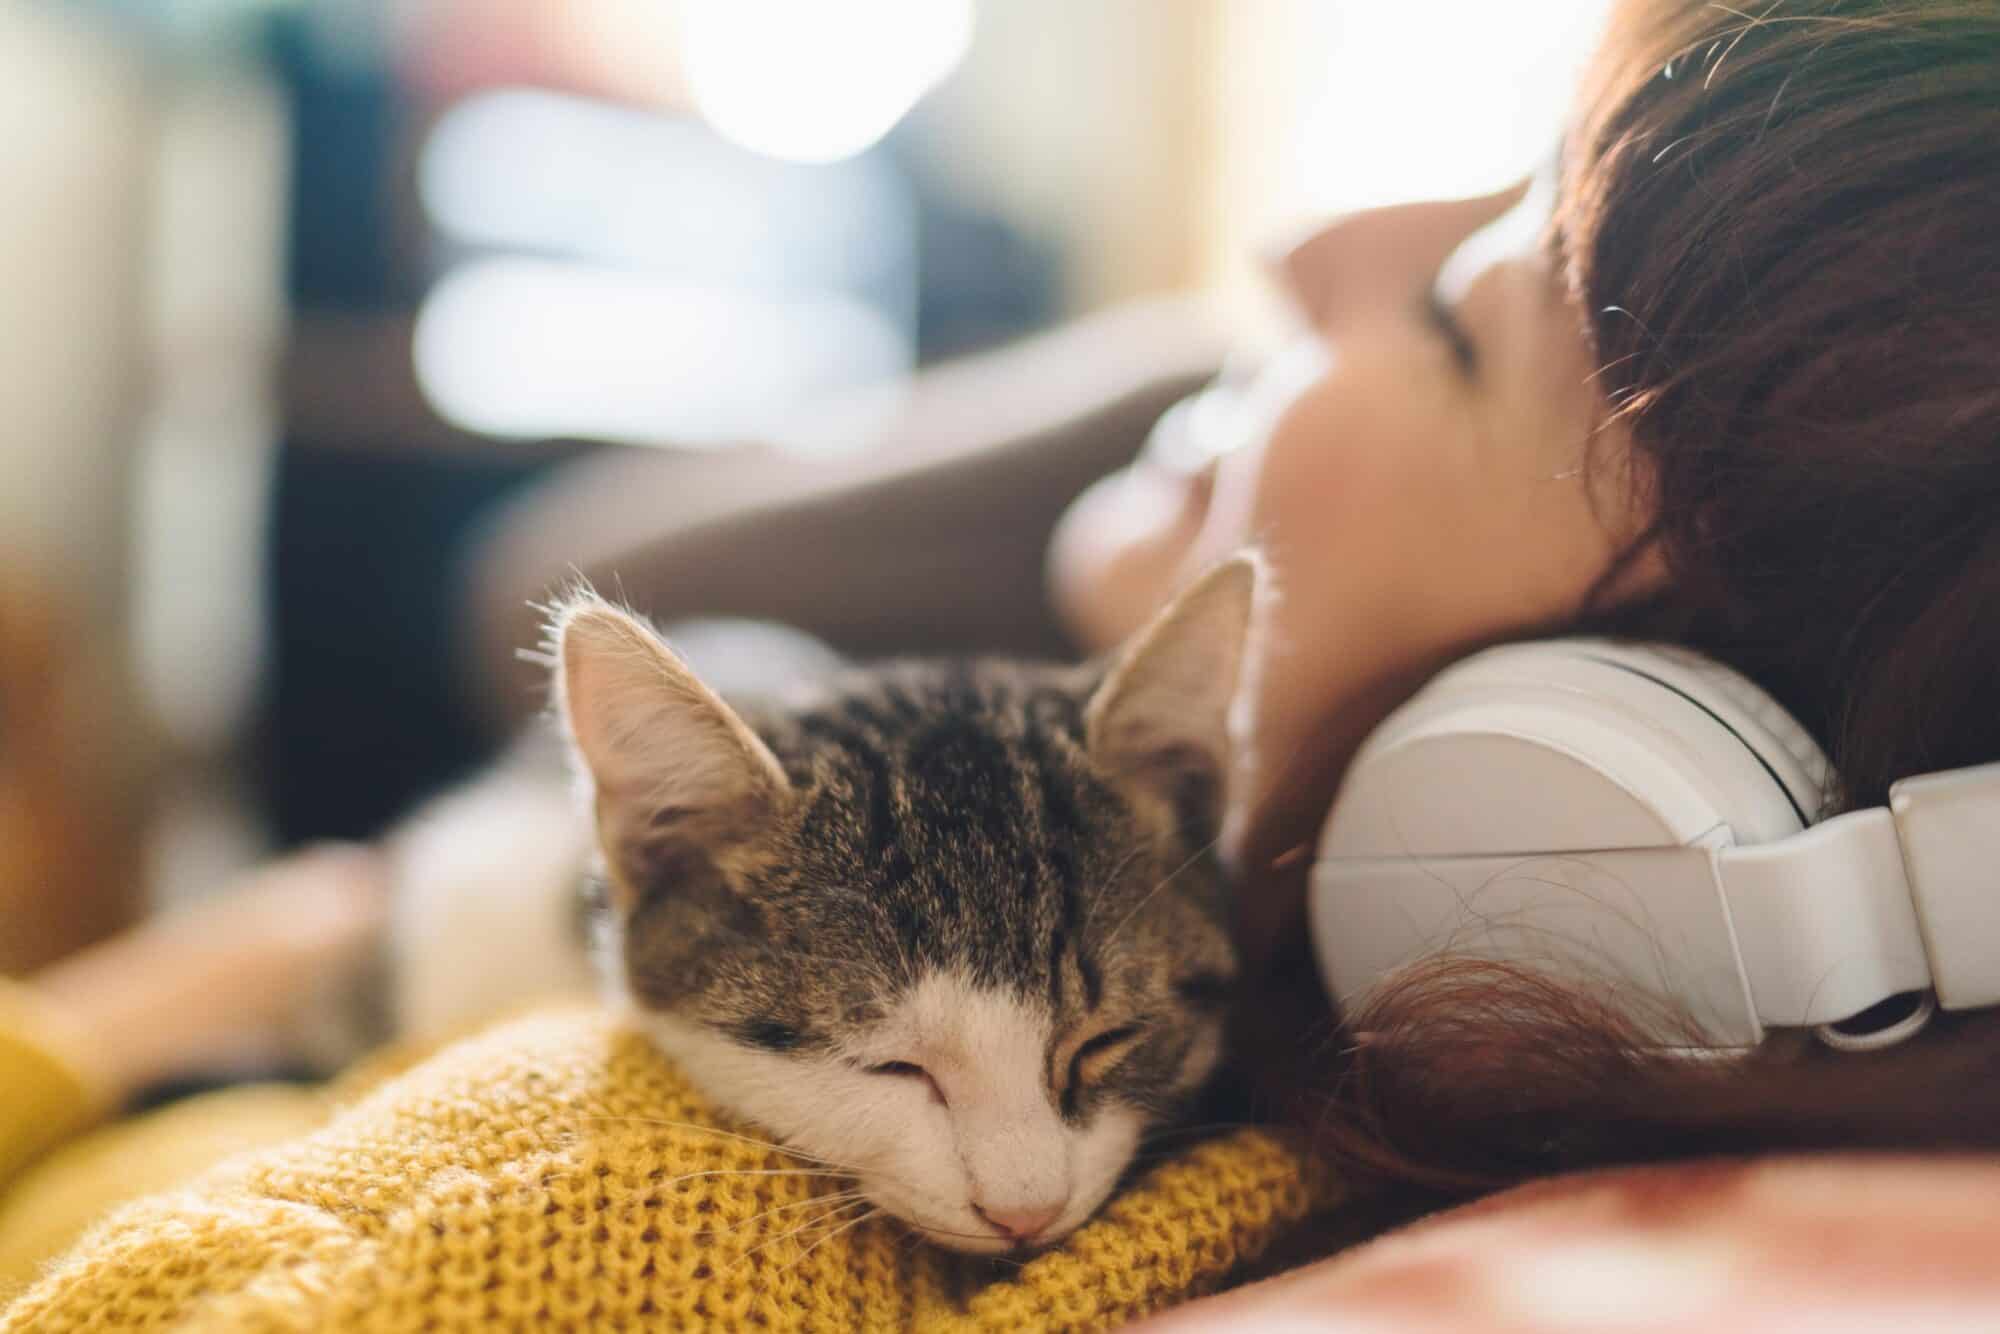 Decoding Pets’ Musical Preferences